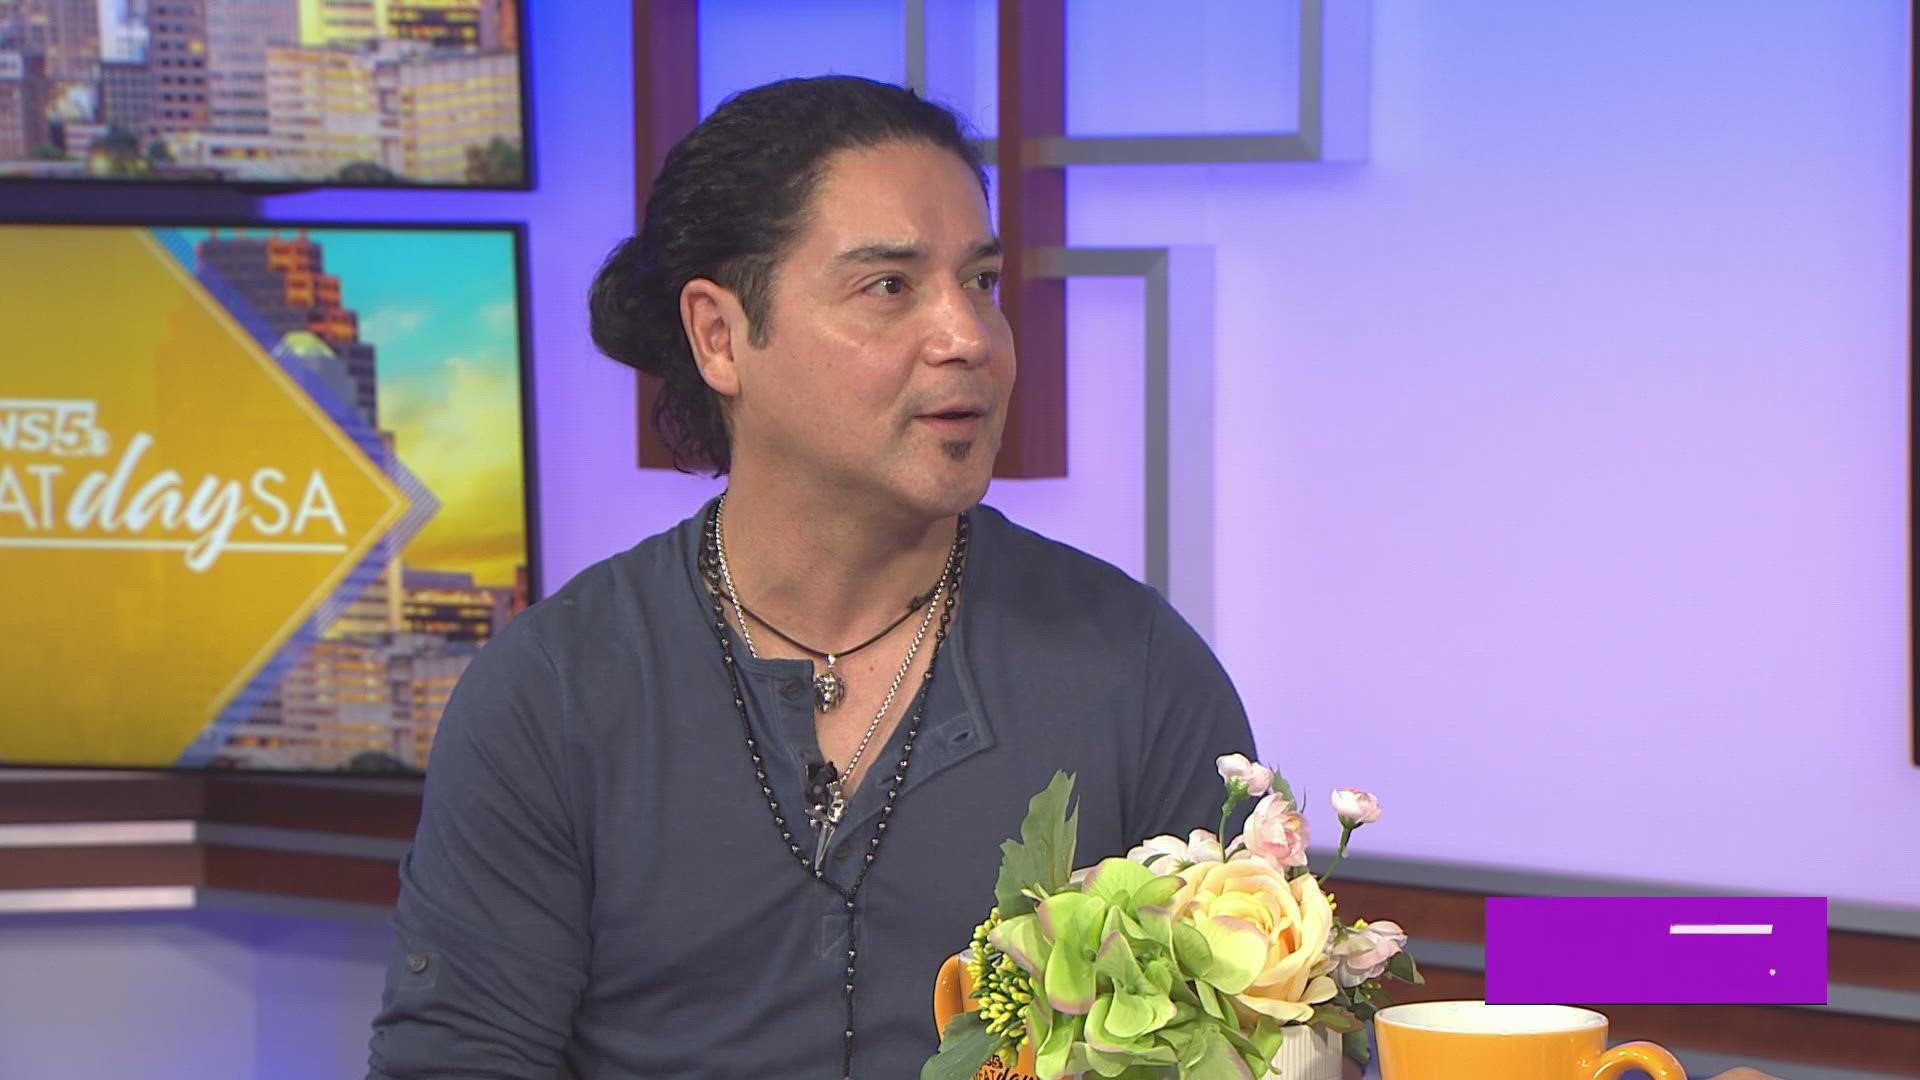 Tejano star, Chris Perez talked to us about his new music, his hot sauce and more!